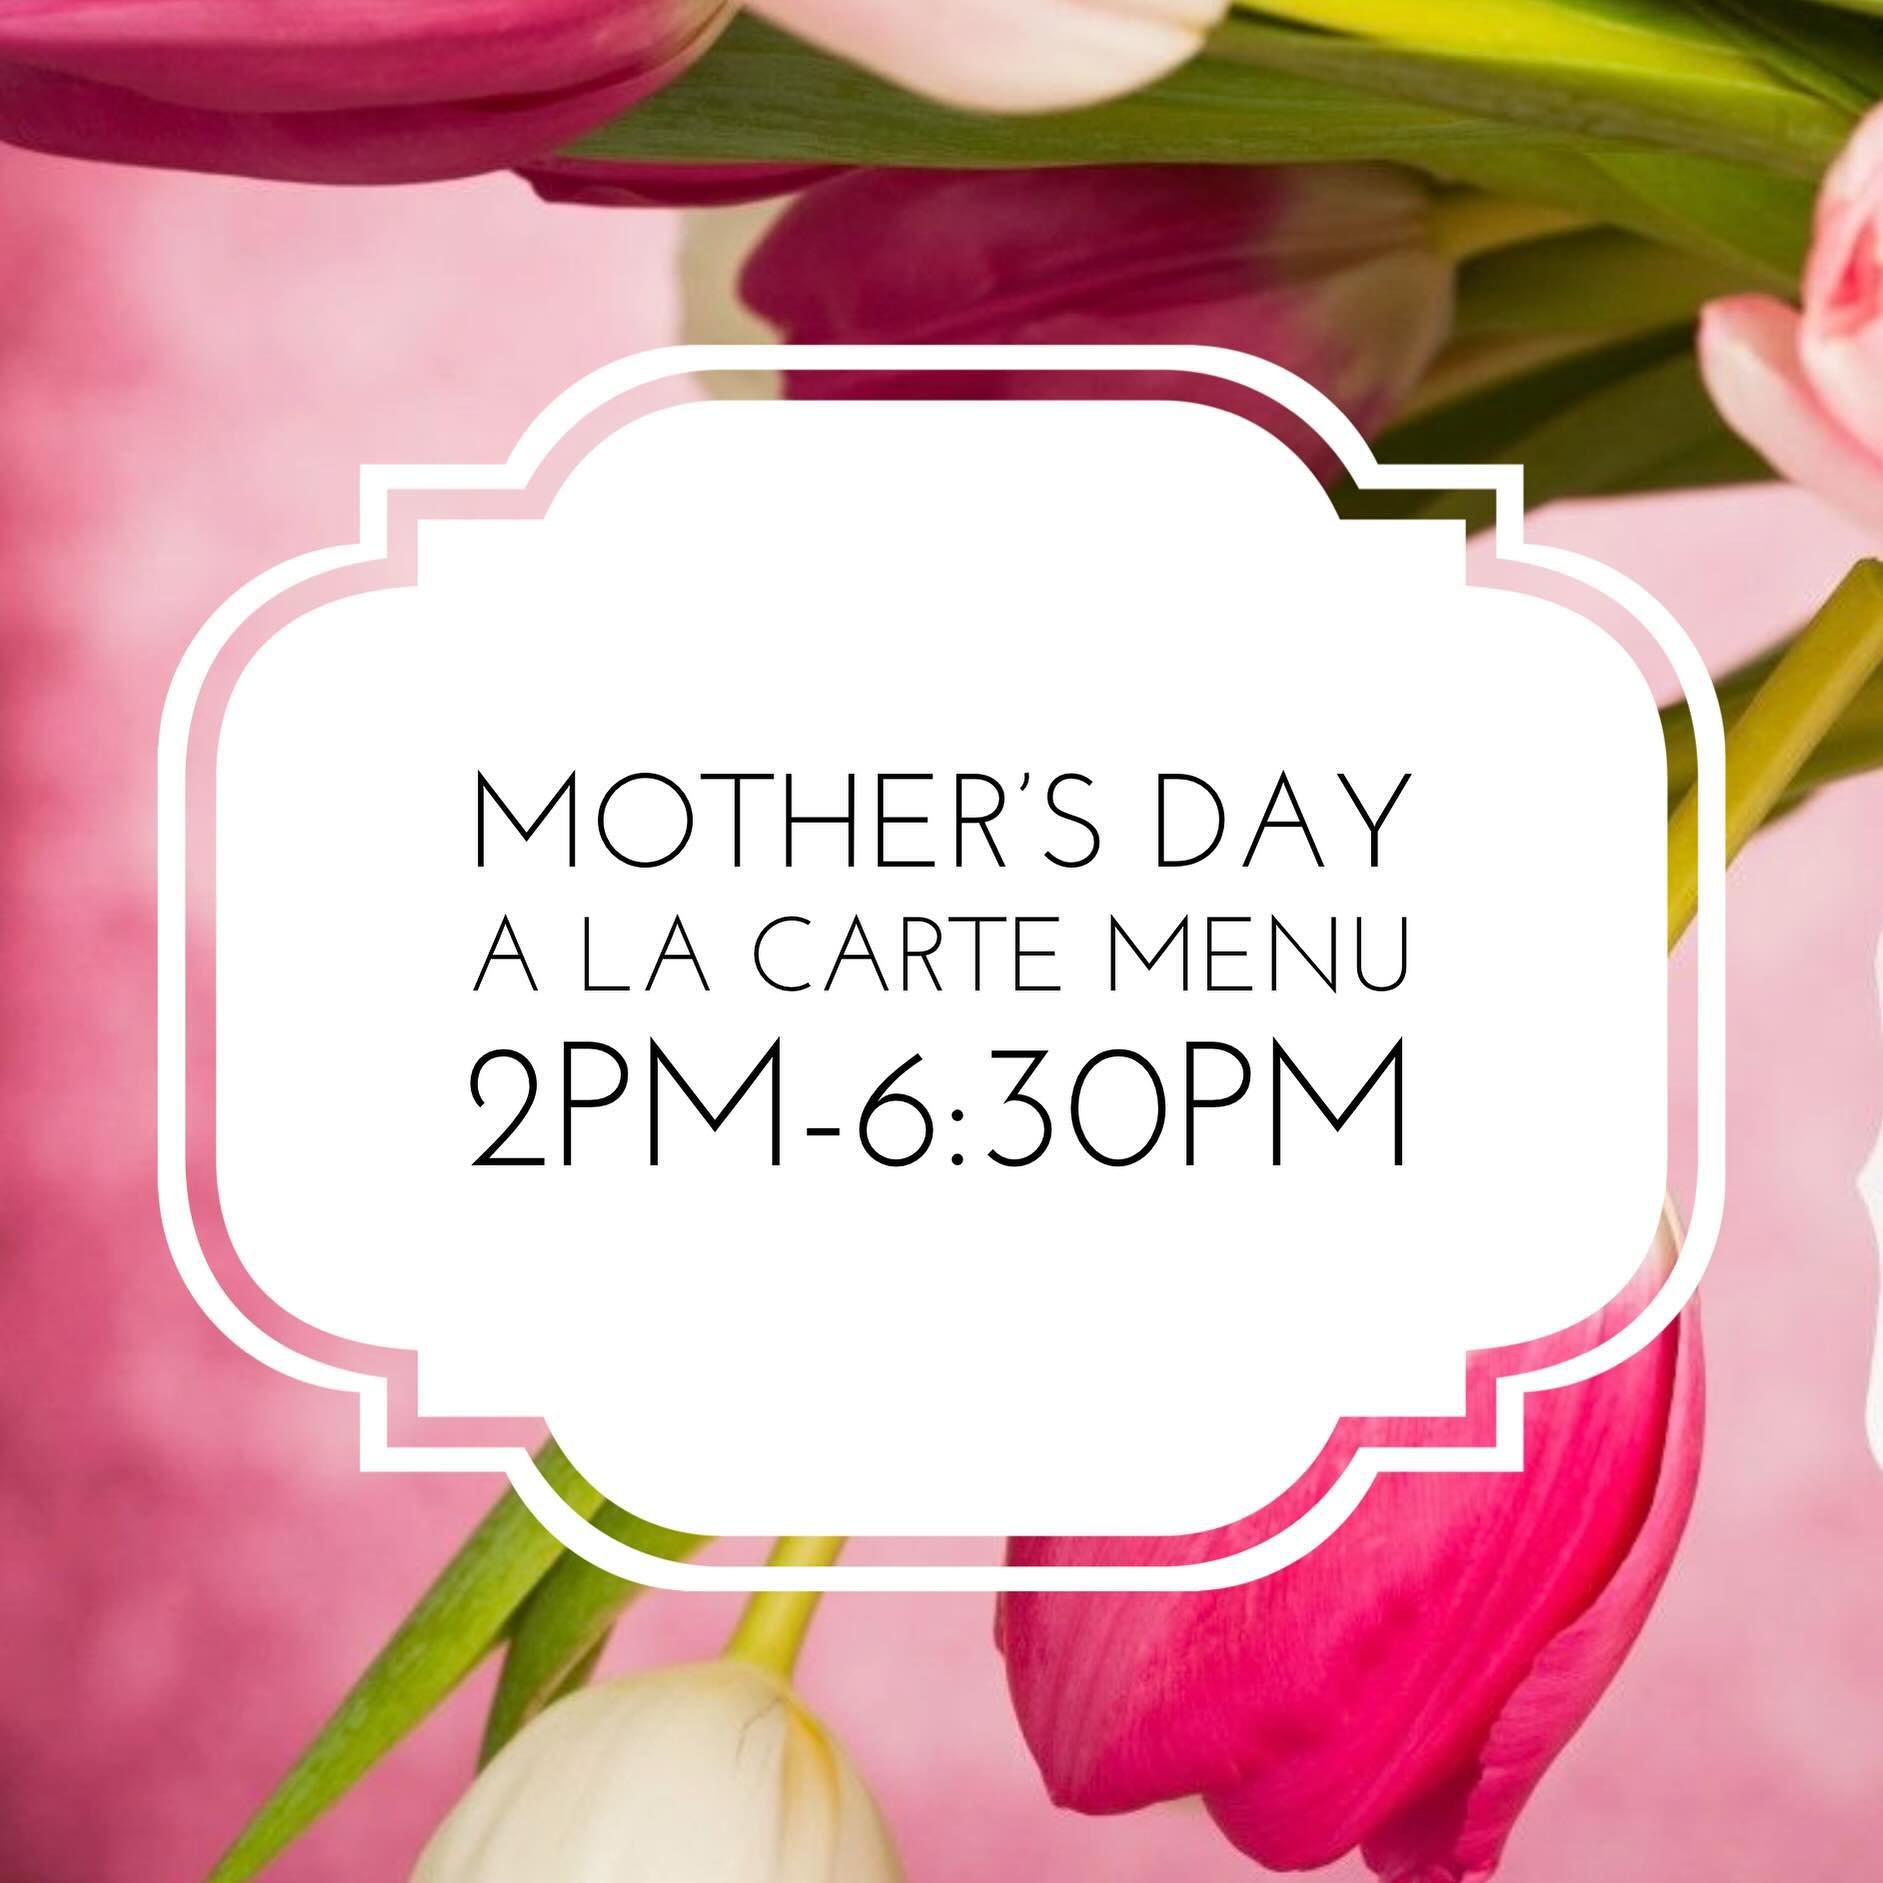 Mother&rsquo;s Day is less than a month away! 
We are now accepting reservations. 

#stonecreekinn #eastquogue #hamptons #longislandrestaurants